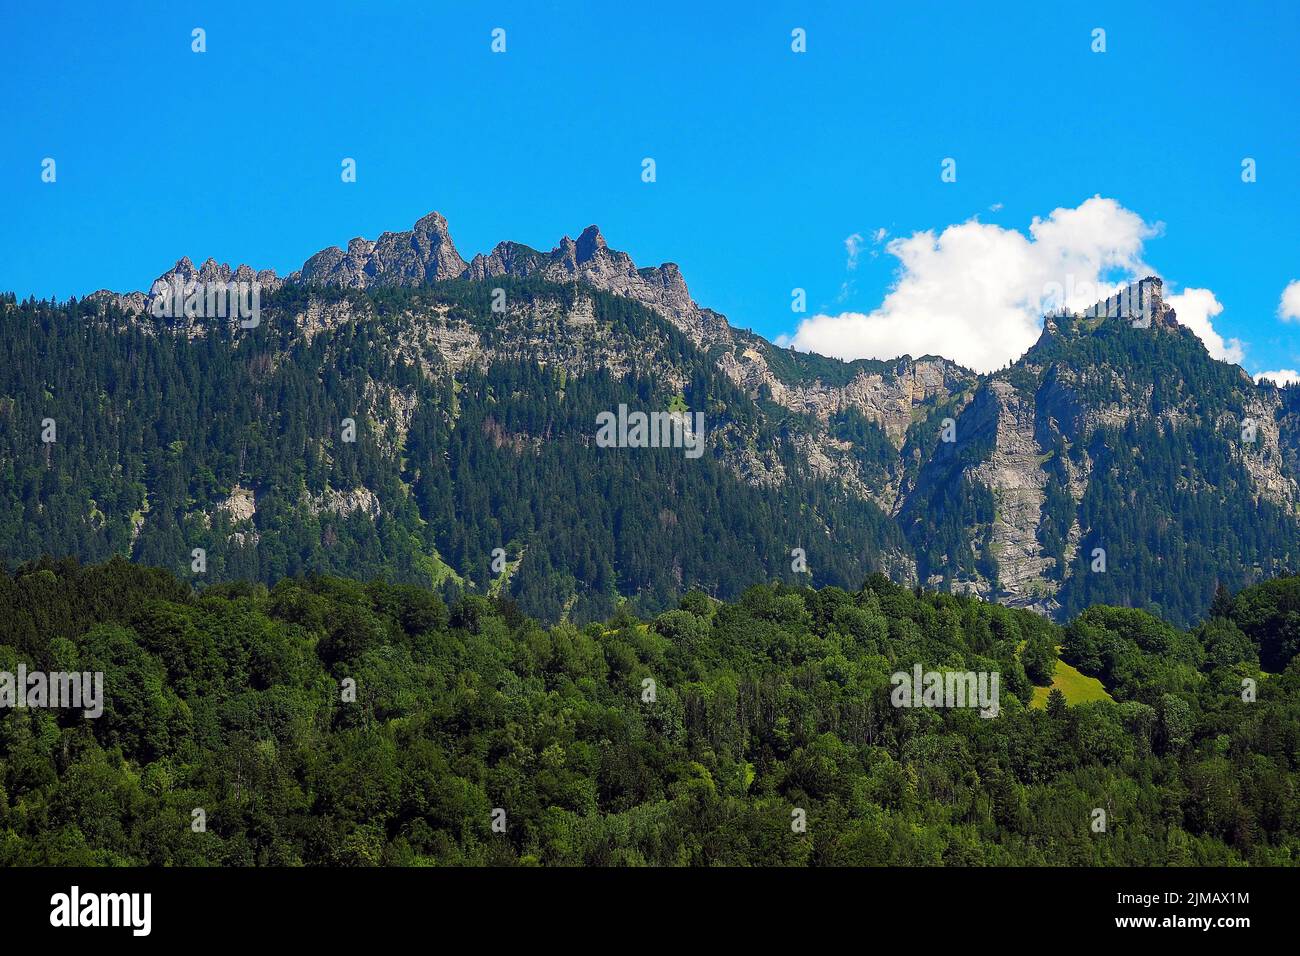 Mountain scene in Bludenz Austria  with blue sky and fluffy clouds Stock Photo